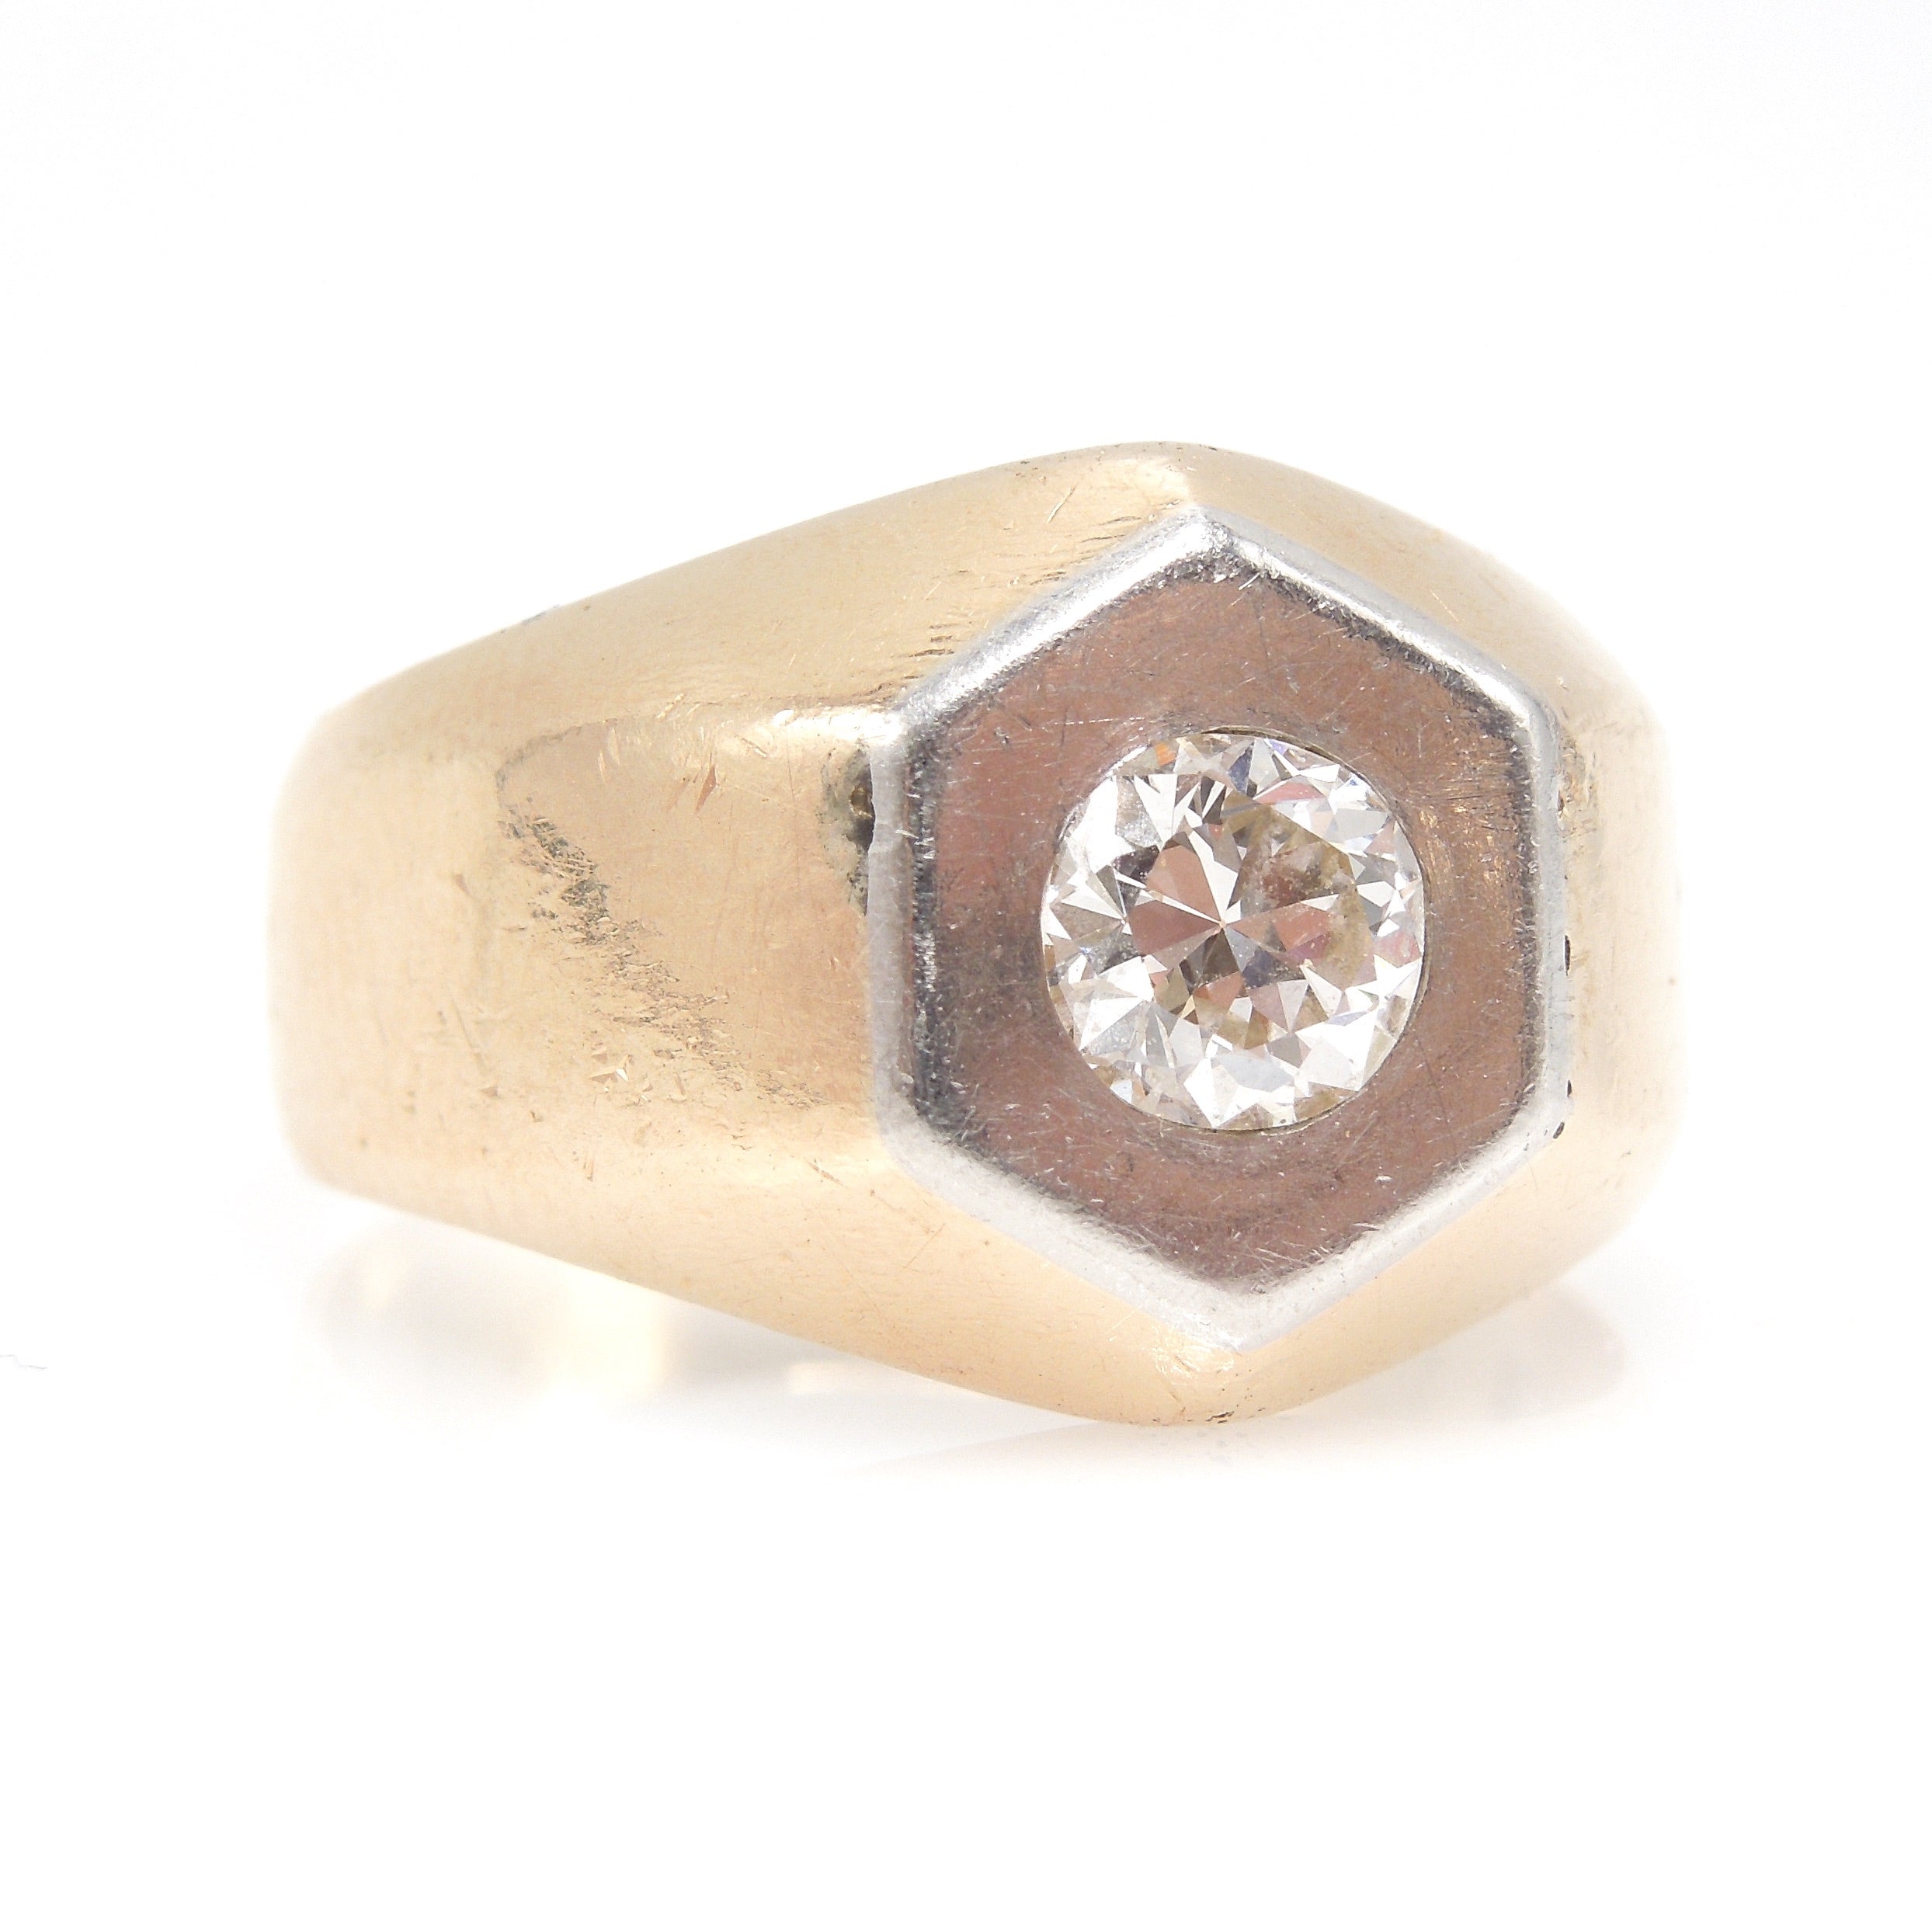 Large Bicolor Hexagonal Gents Ring in Platinum and Yellow Gold with Flush Set Half Carat Diamond